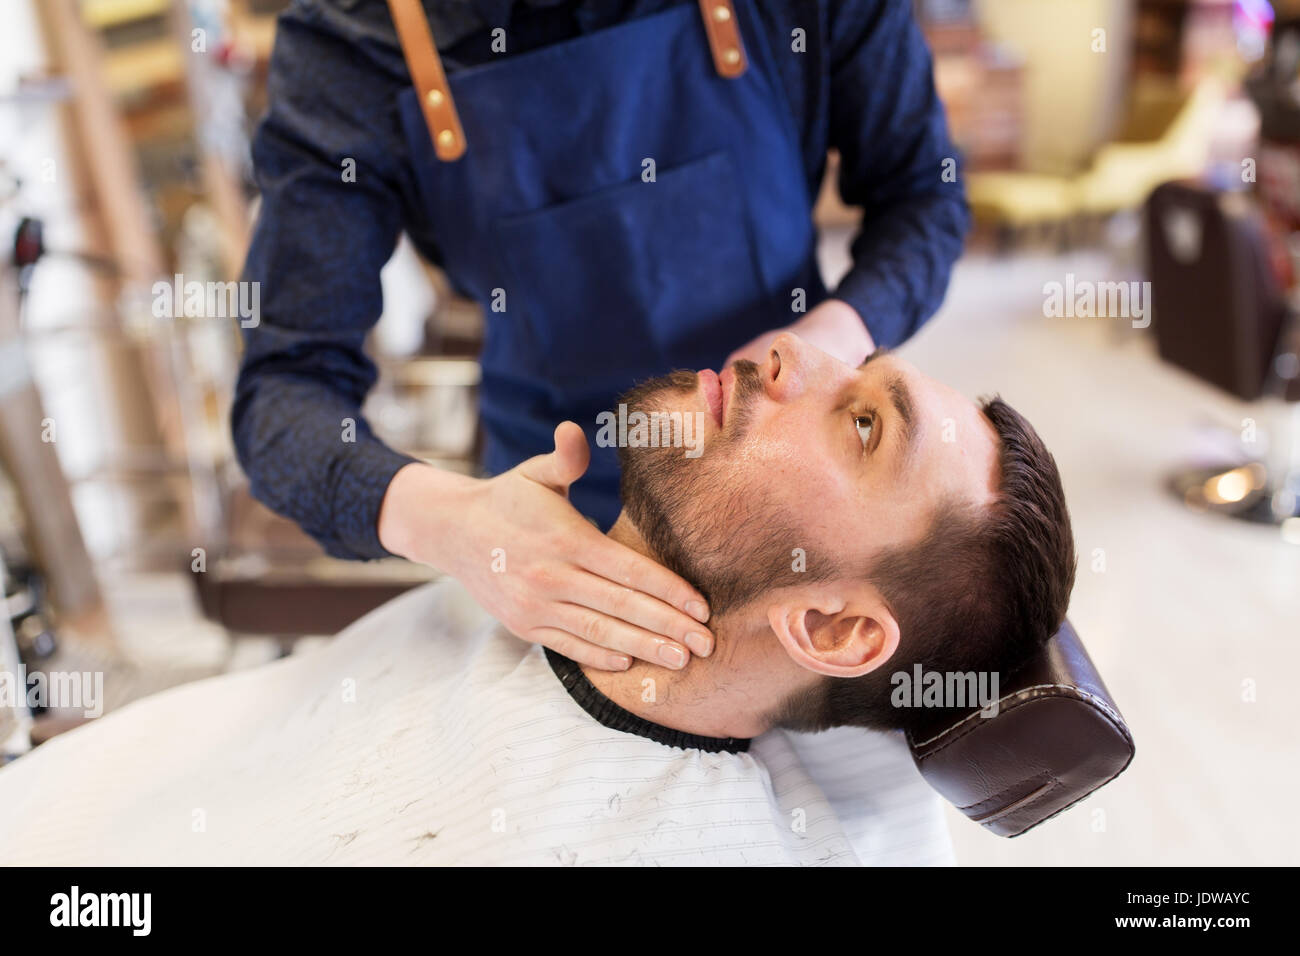 Post Shave Stock Photos & Post Shave Stock Images - Alamy